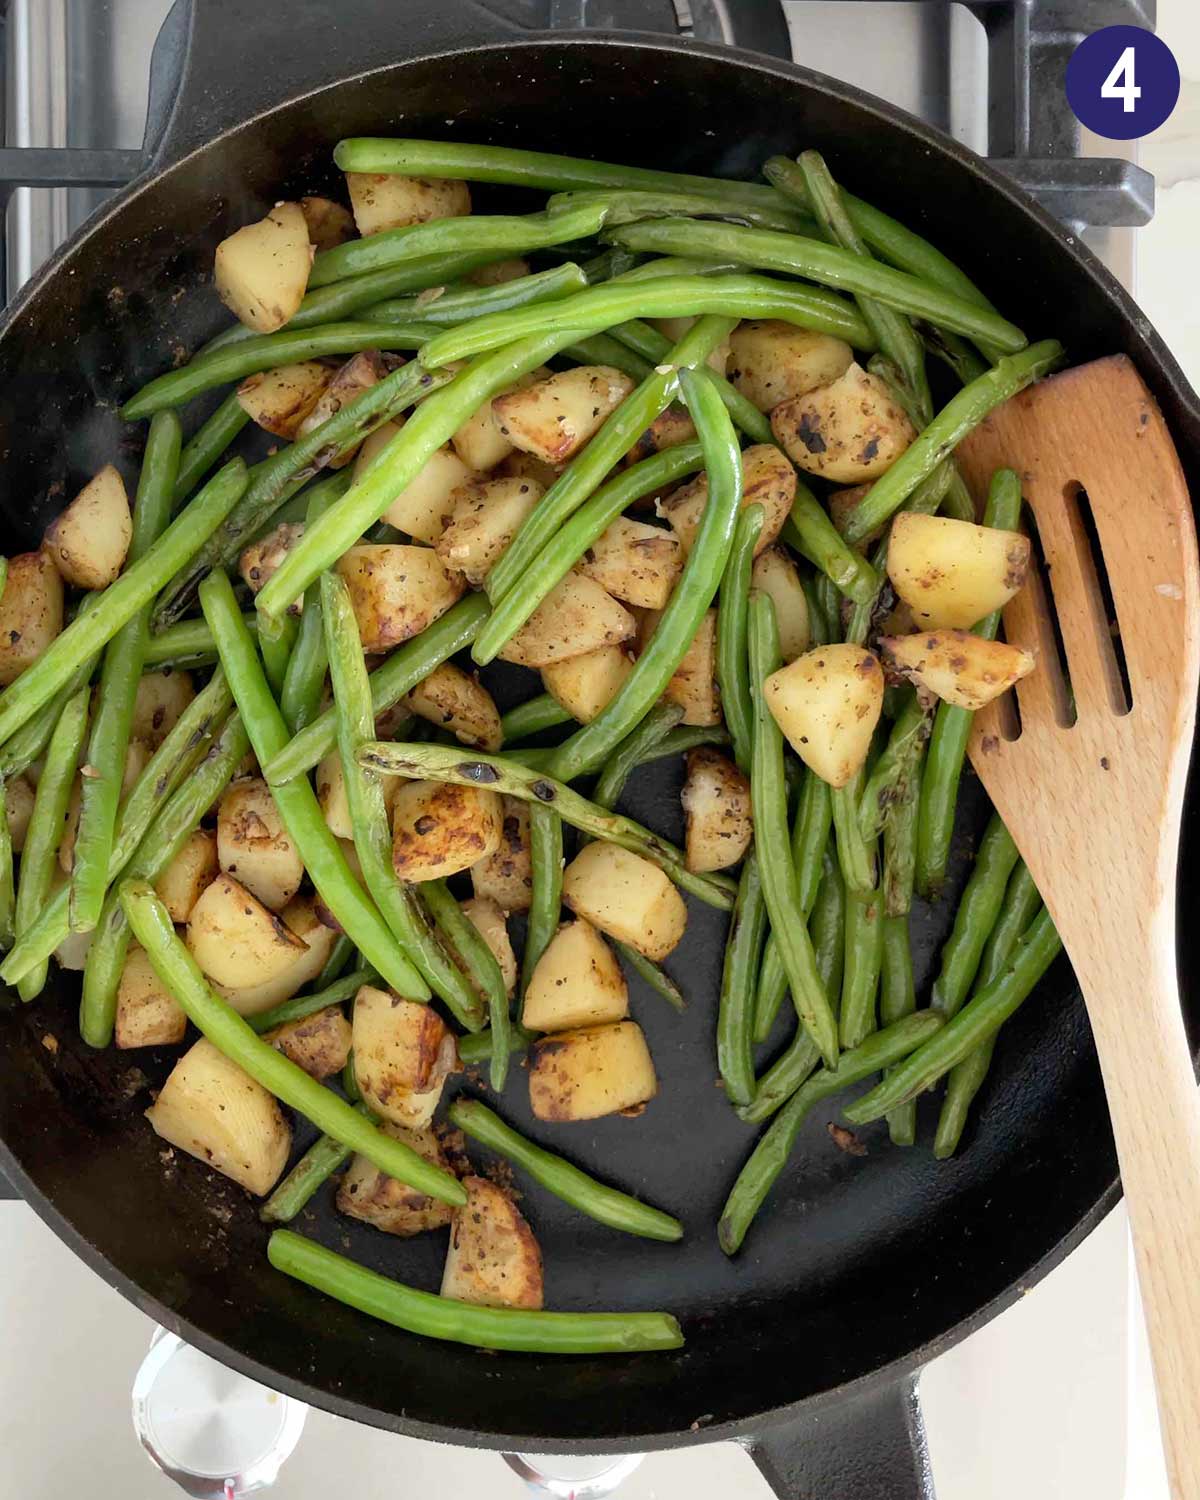 Roasted green beans and potatoes in a cast iron pan after cooking. 